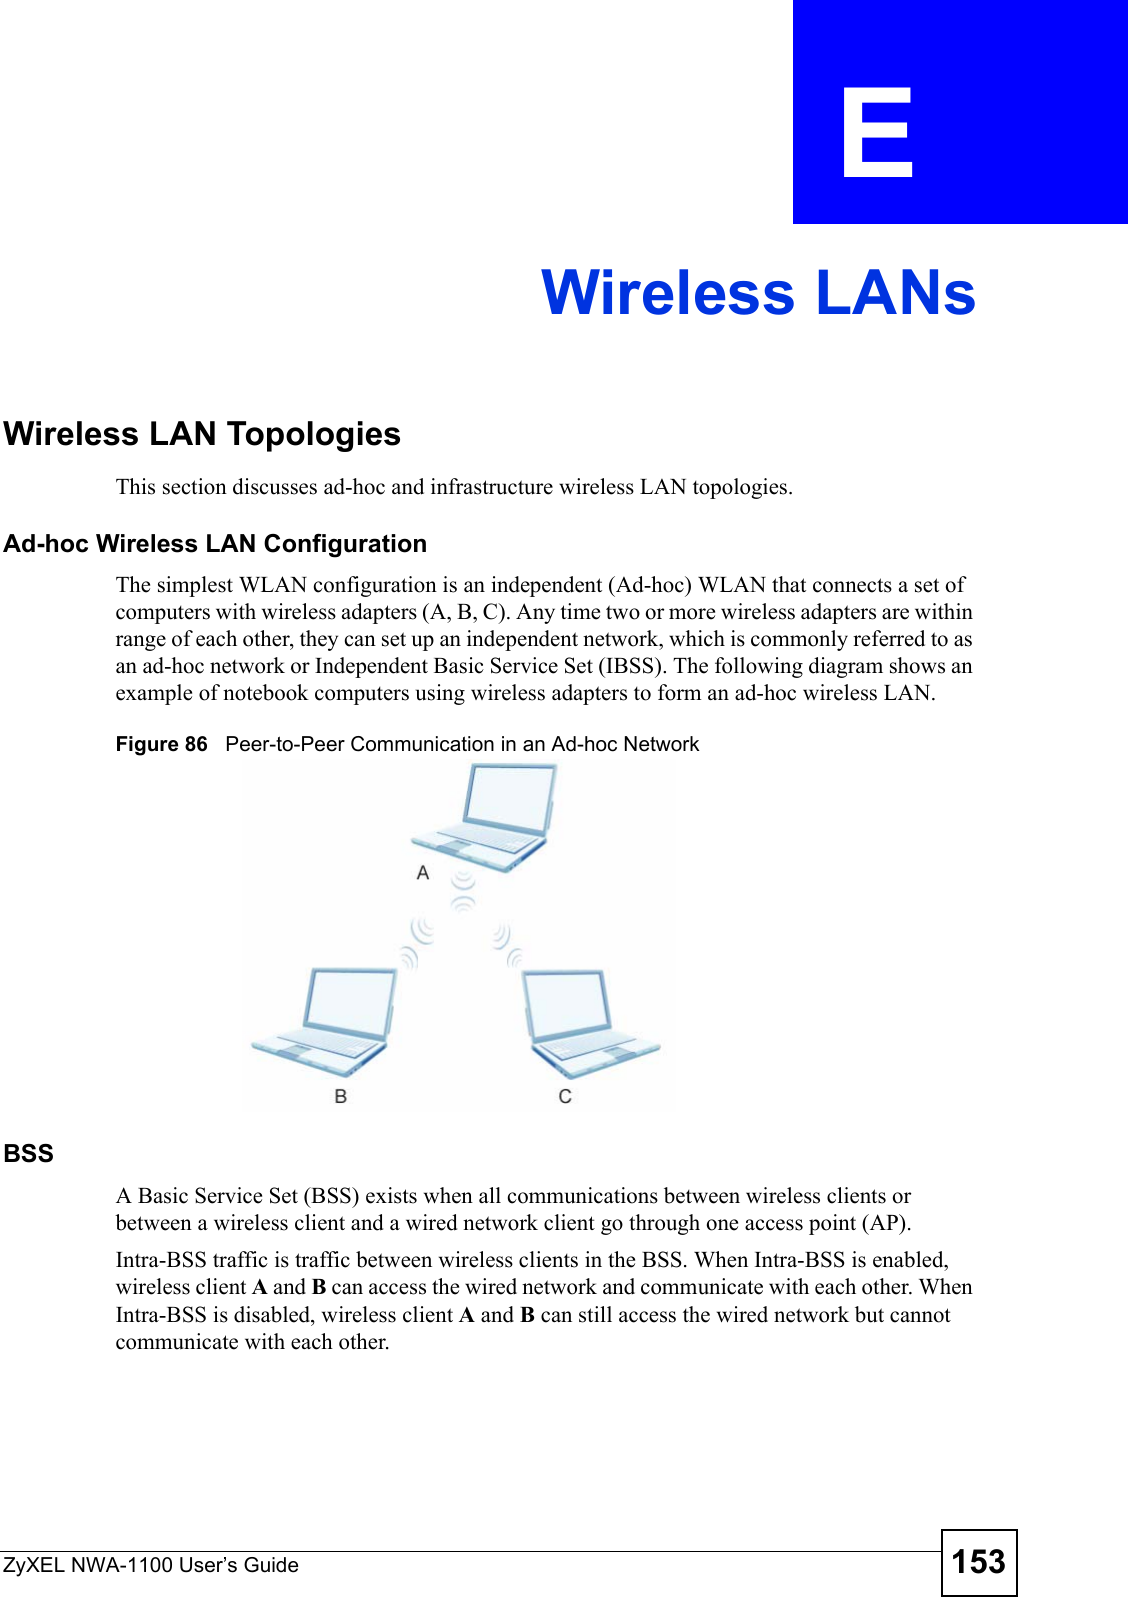 ZyXEL NWA-1100 User’s Guide 153APPENDIX  E Wireless LANsWireless LAN TopologiesThis section discusses ad-hoc and infrastructure wireless LAN topologies.Ad-hoc Wireless LAN ConfigurationThe simplest WLAN configuration is an independent (Ad-hoc) WLAN that connects a set of computers with wireless adapters (A, B, C). Any time two or more wireless adapters are within range of each other, they can set up an independent network, which is commonly referred to as an ad-hoc network or Independent Basic Service Set (IBSS). The following diagram shows an example of notebook computers using wireless adapters to form an ad-hoc wireless LAN. Figure 86   Peer-to-Peer Communication in an Ad-hoc NetworkBSSA Basic Service Set (BSS) exists when all communications between wireless clients or between a wireless client and a wired network client go through one access point (AP). Intra-BSS traffic is traffic between wireless clients in the BSS. When Intra-BSS is enabled, wireless client A and B can access the wired network and communicate with each other. When Intra-BSS is disabled, wireless client A and B can still access the wired network but cannot communicate with each other.